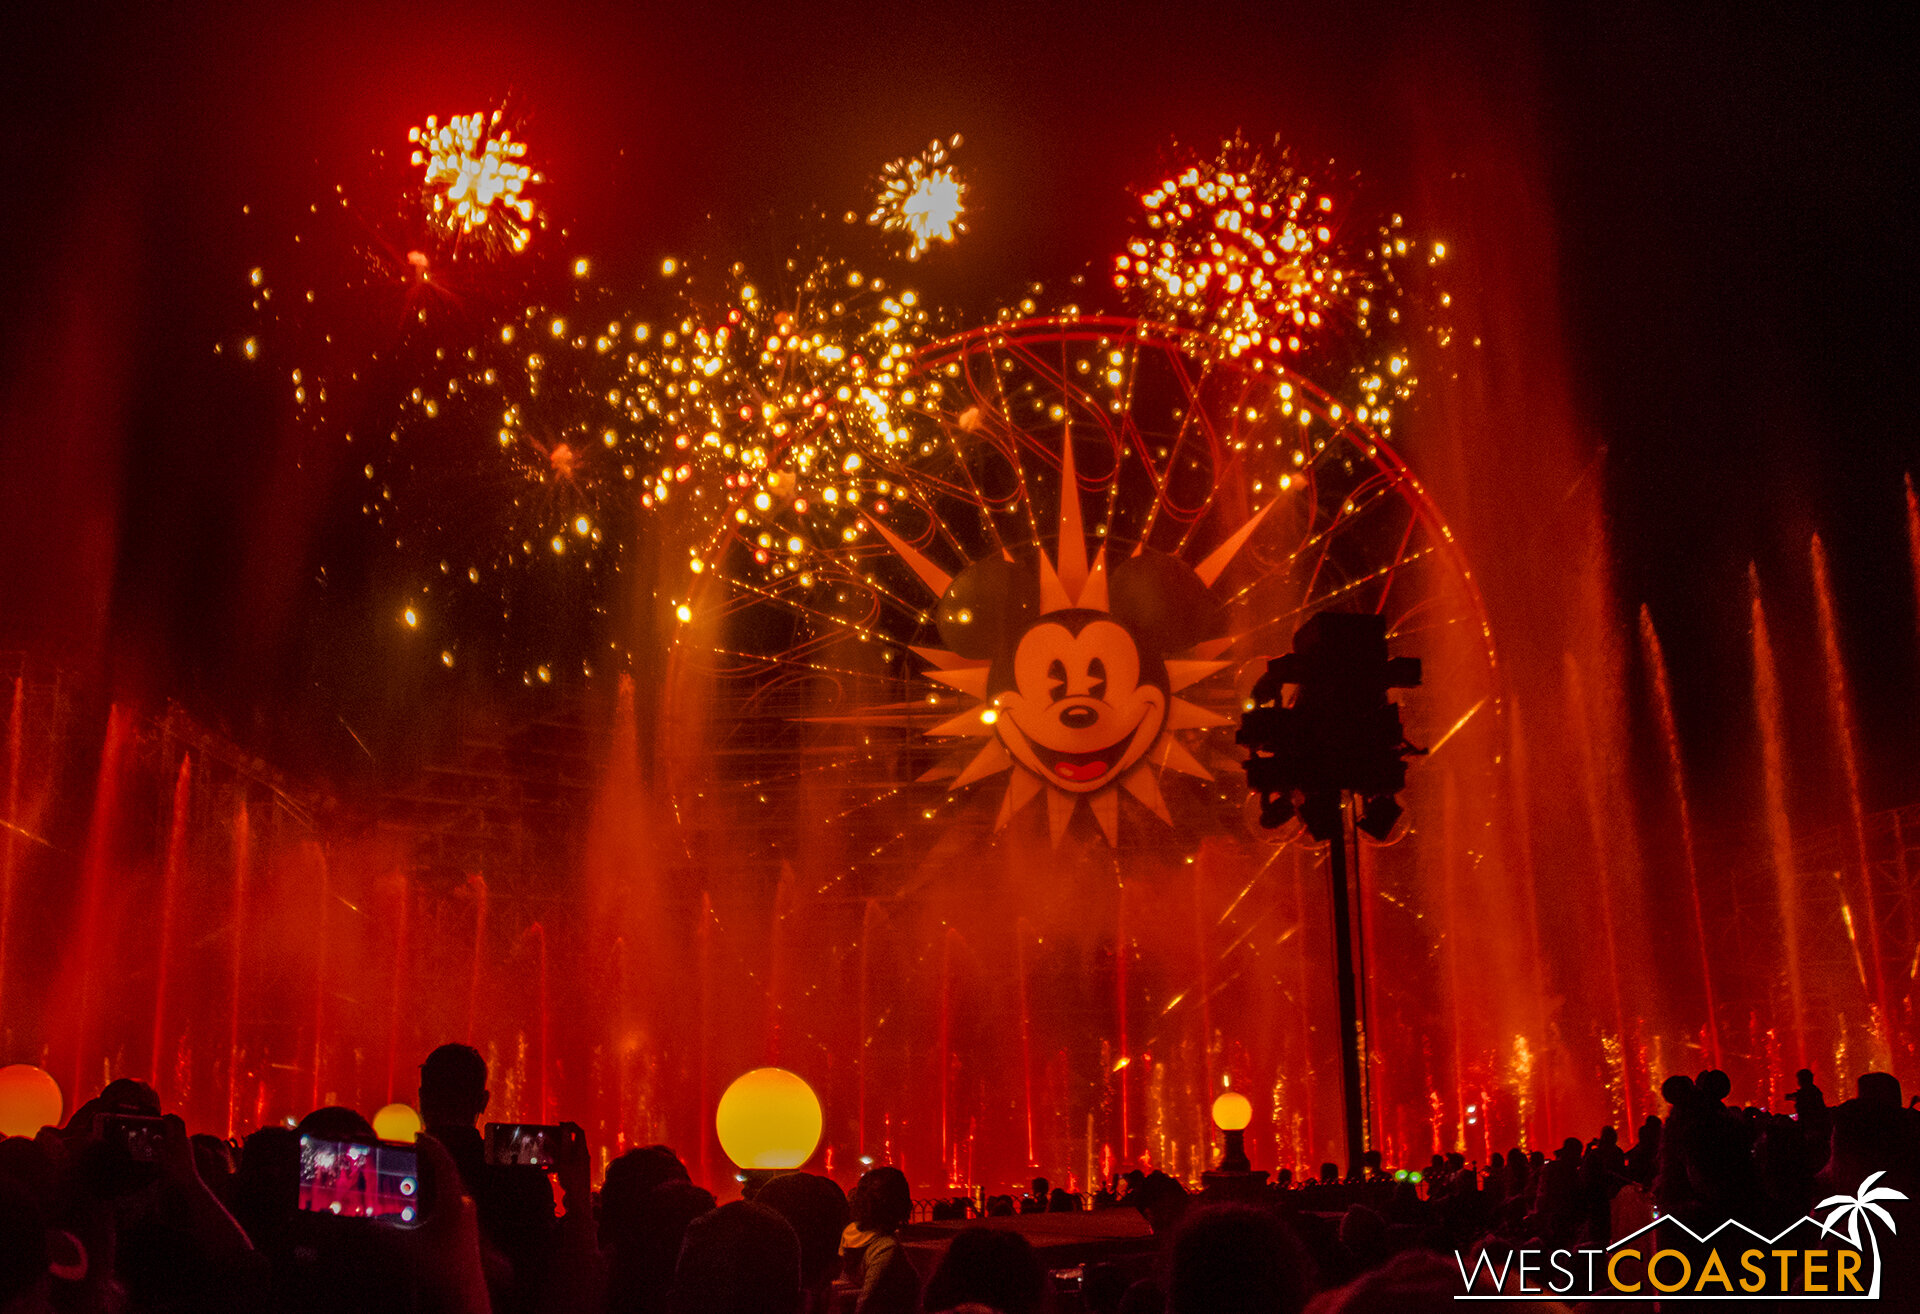  The mini-show ends with a pyrotechnic display before the main World of Color show starts. 